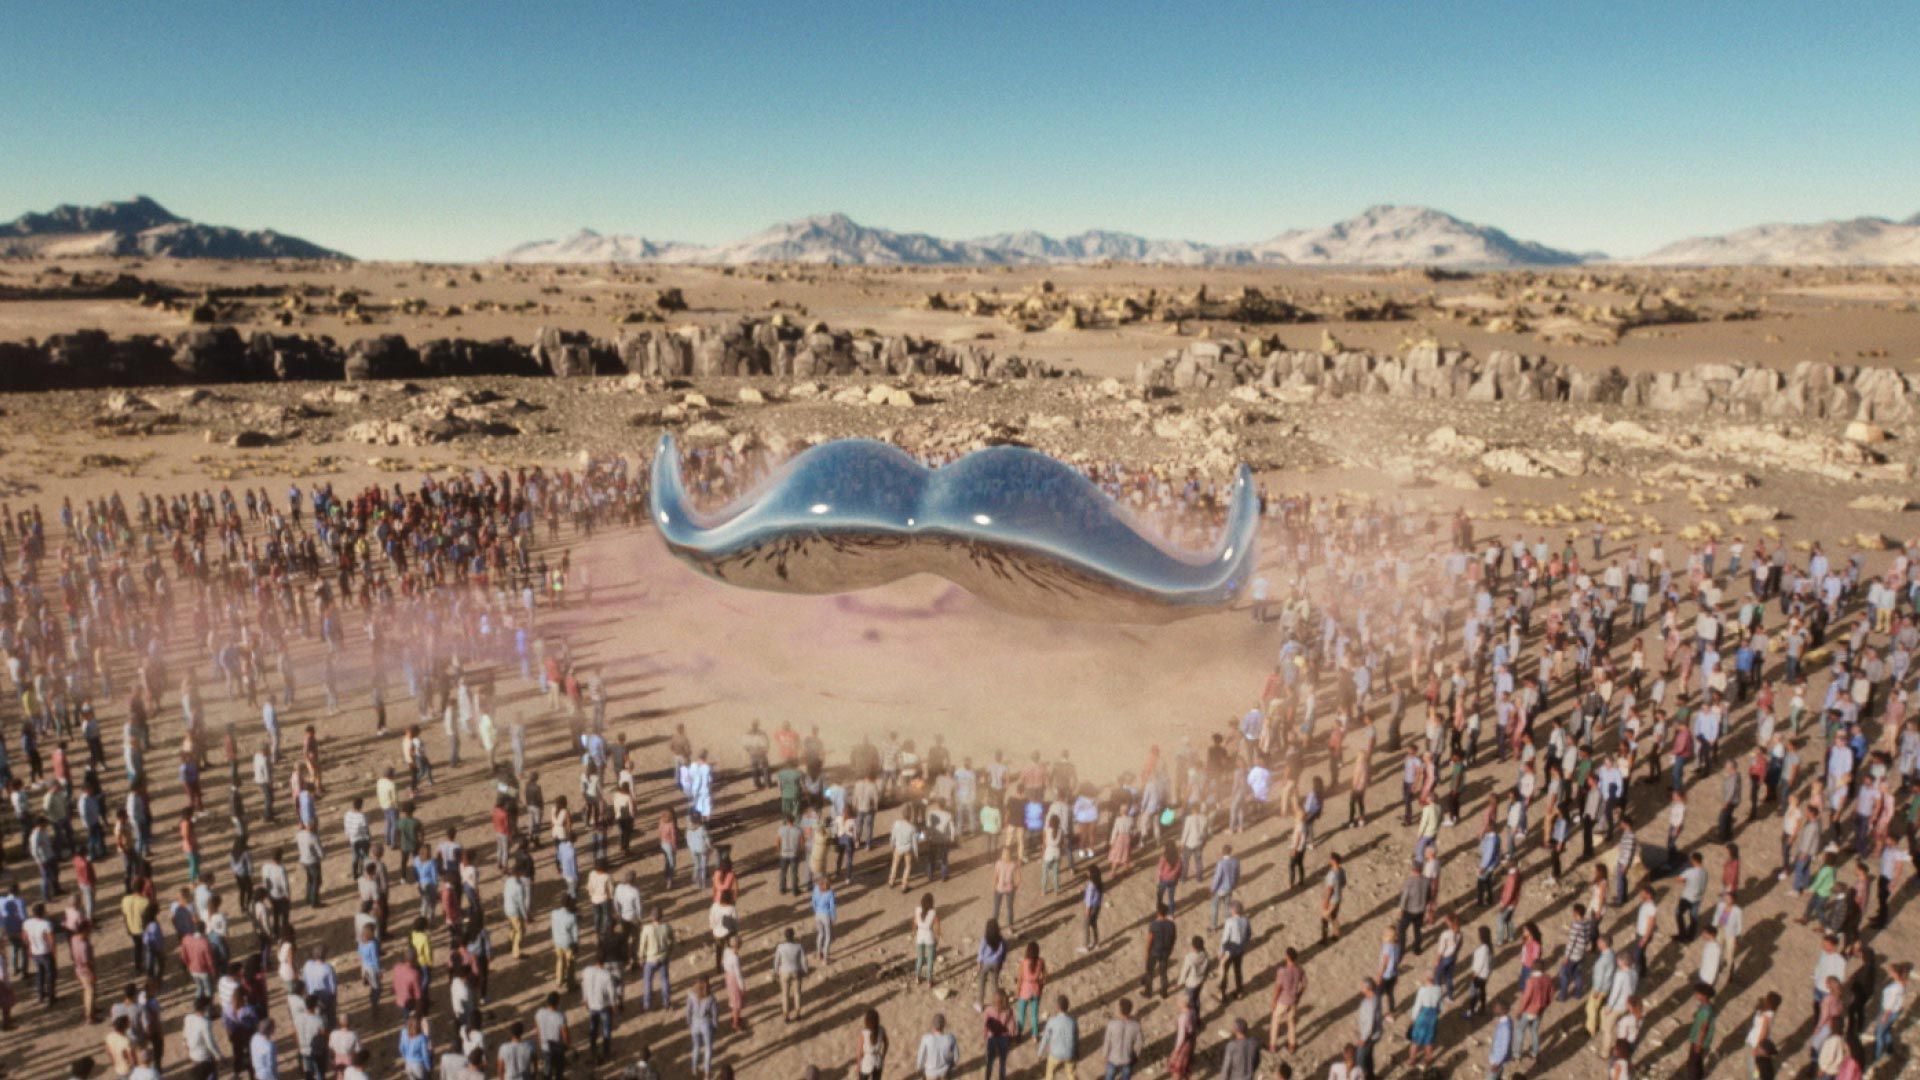 Image of a giant silver moustache, descending on a crowd gathered in a desert.